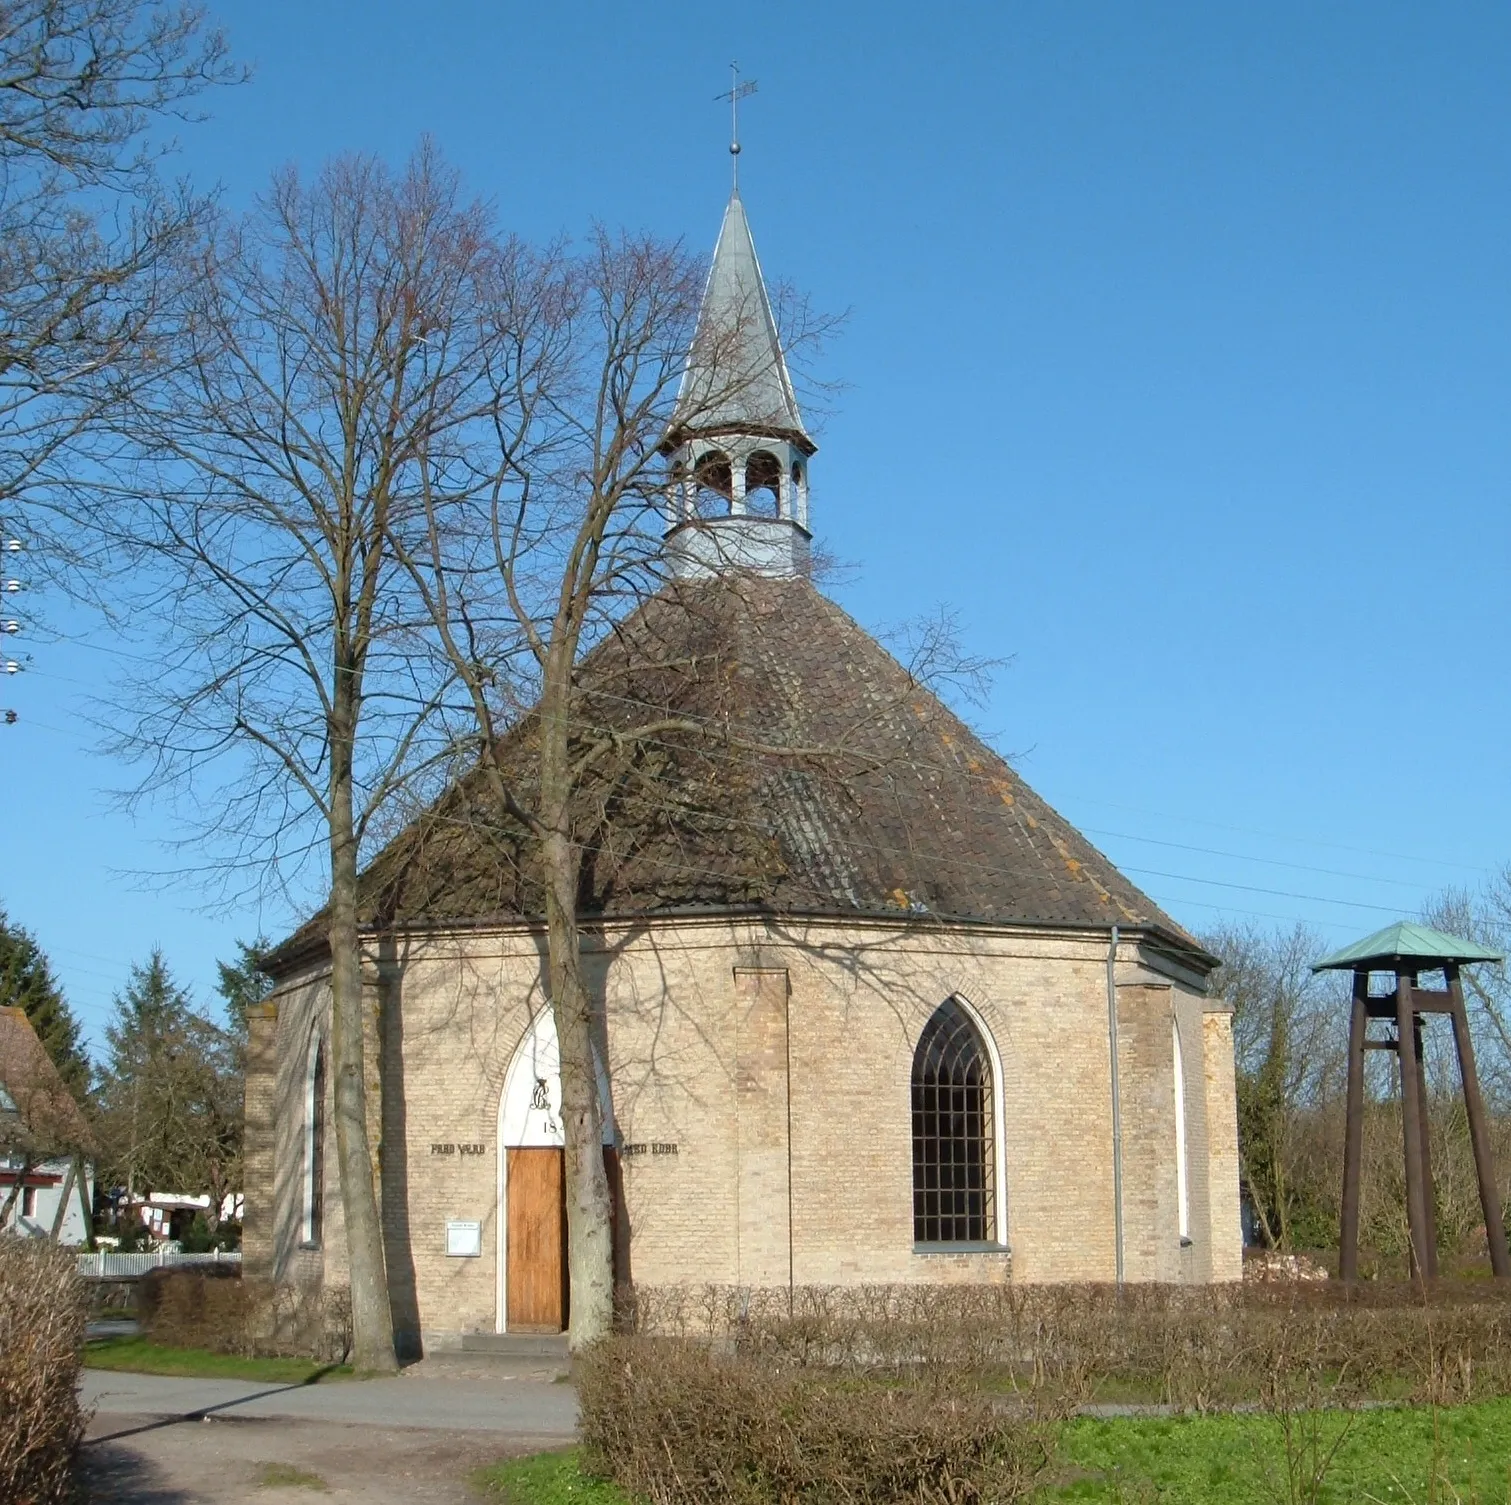 Photo showing: Church in village of Nyord, on island of Nyord, near Møn, Denmark. The church is octaginal and was constructed in  1846. Taken by contributor, spring 2006.